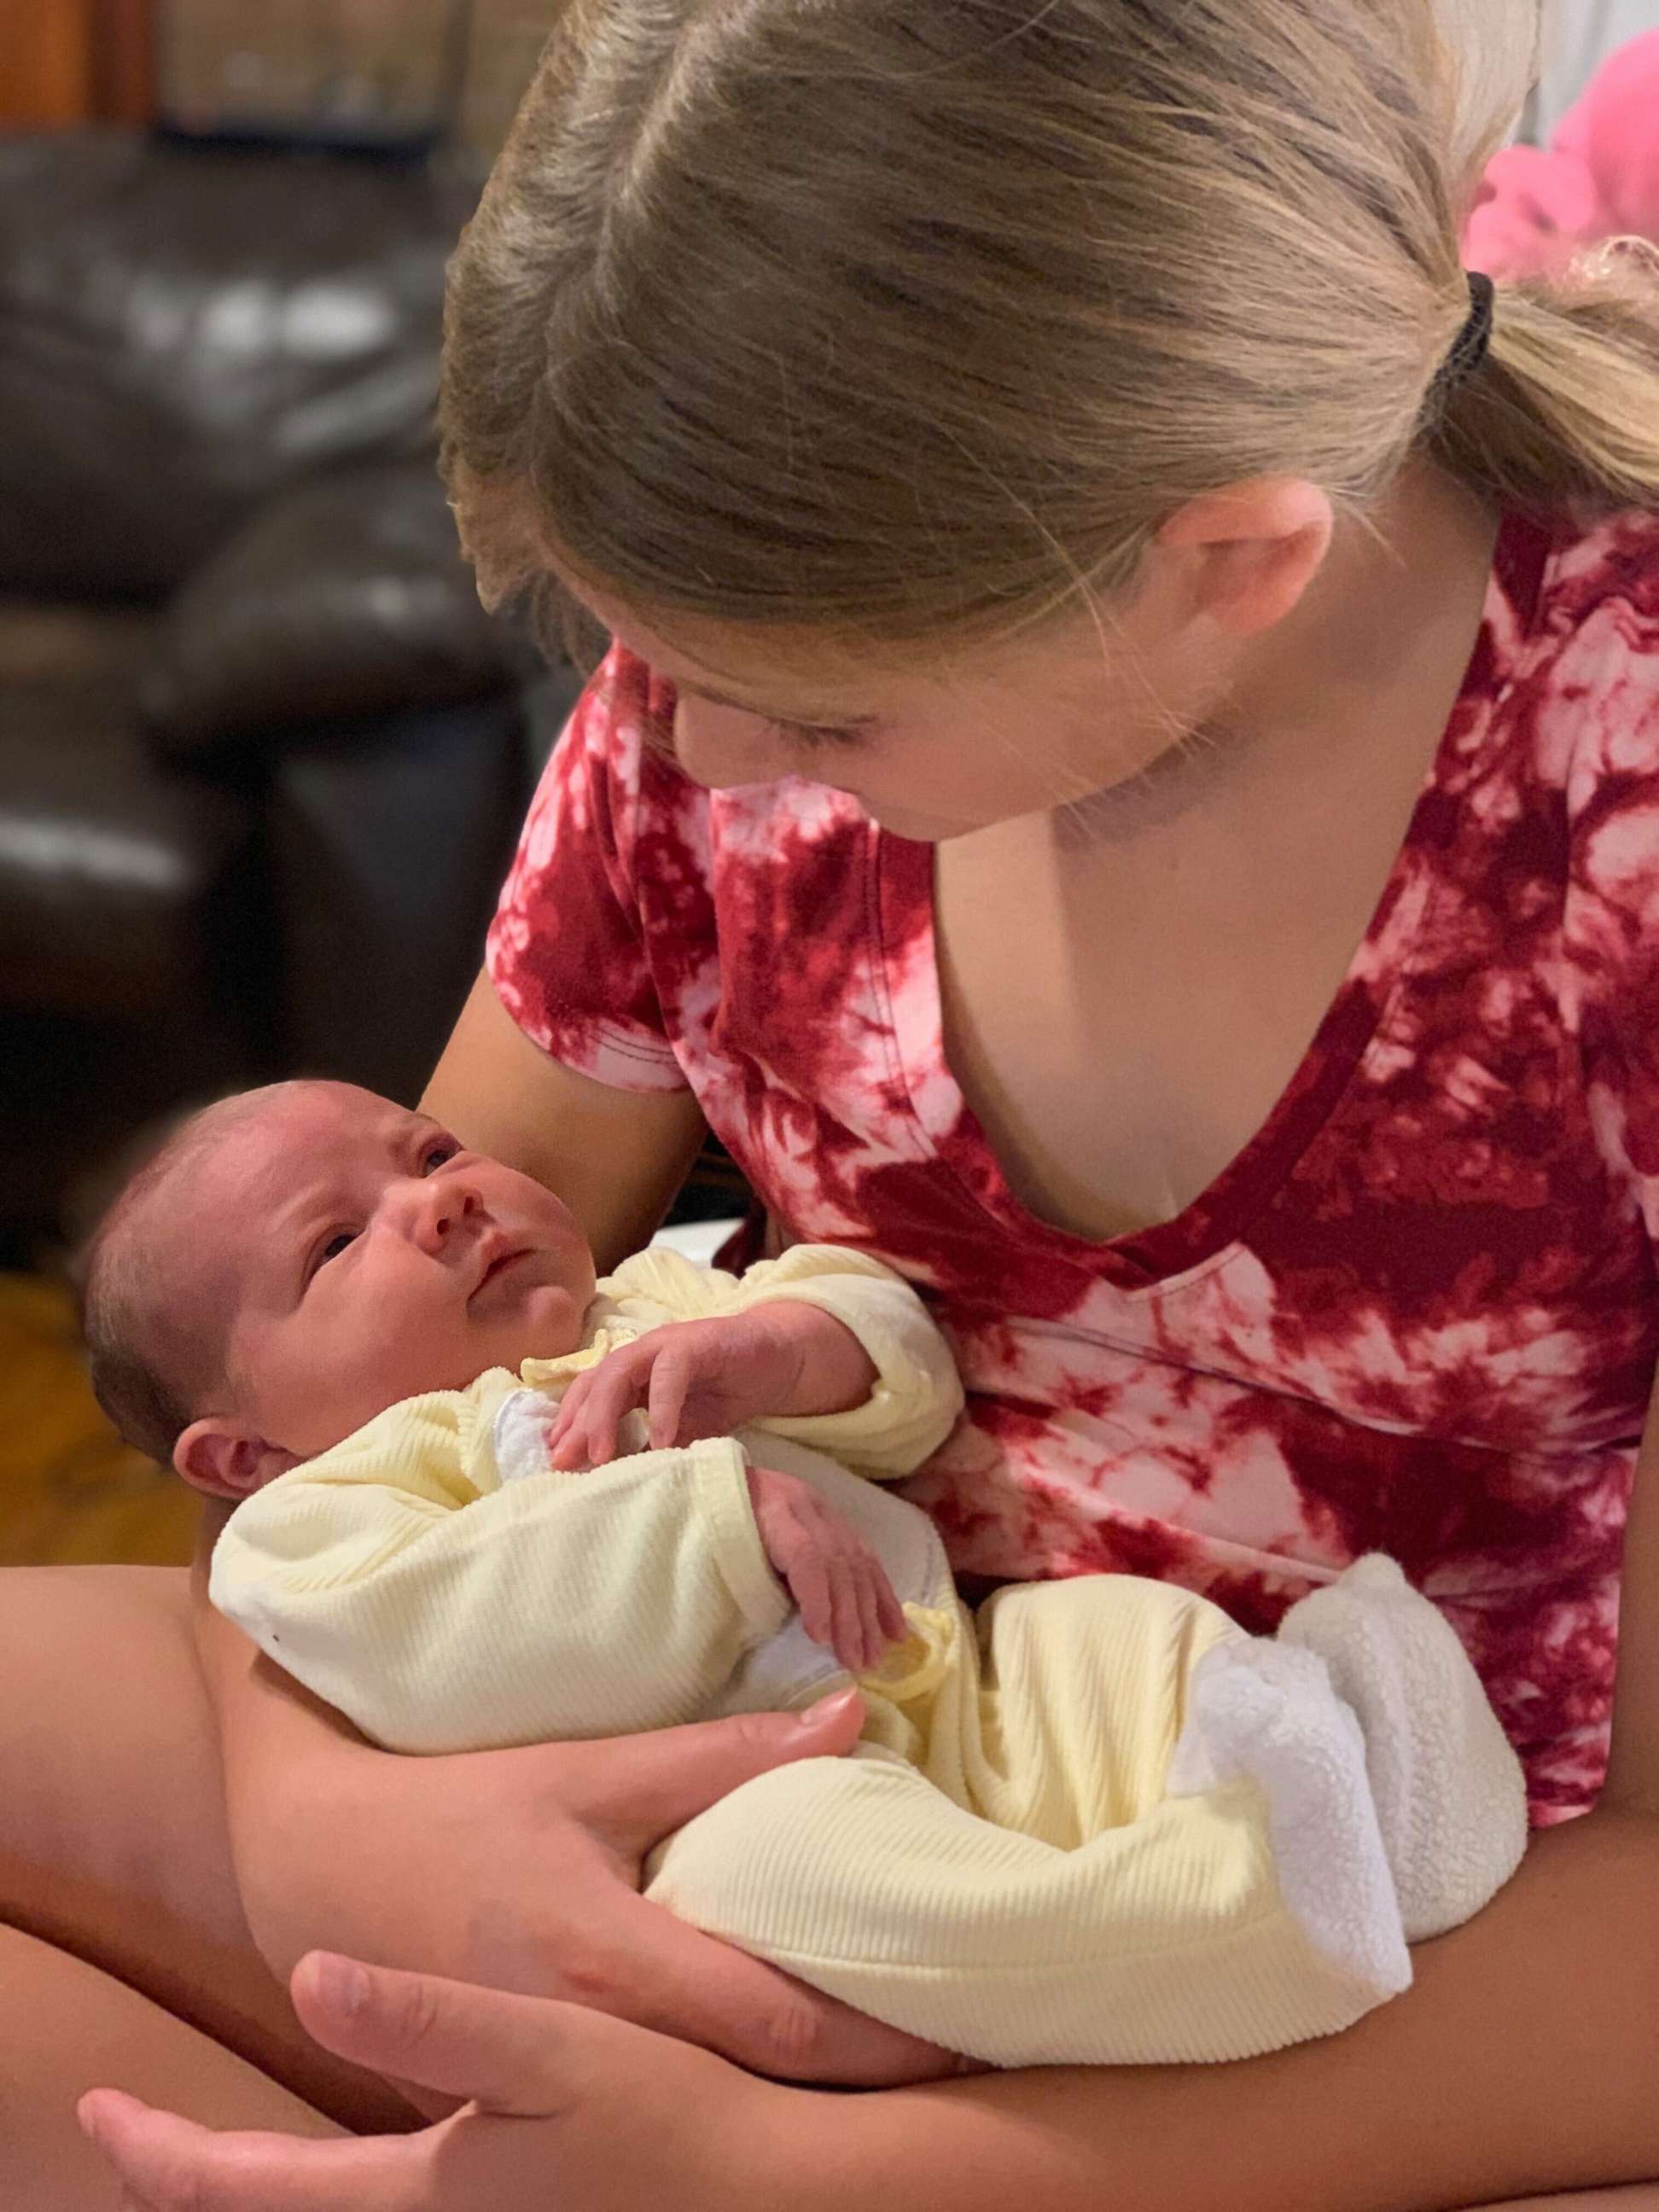 PHOTO: Erin Fernald Gray and Aaron Gray recently welcomed a daughter named Azalea Belle Gray, at their home in Islesford, Maine. Here, Azalea is pictured with her big sister, Phoebe. 
